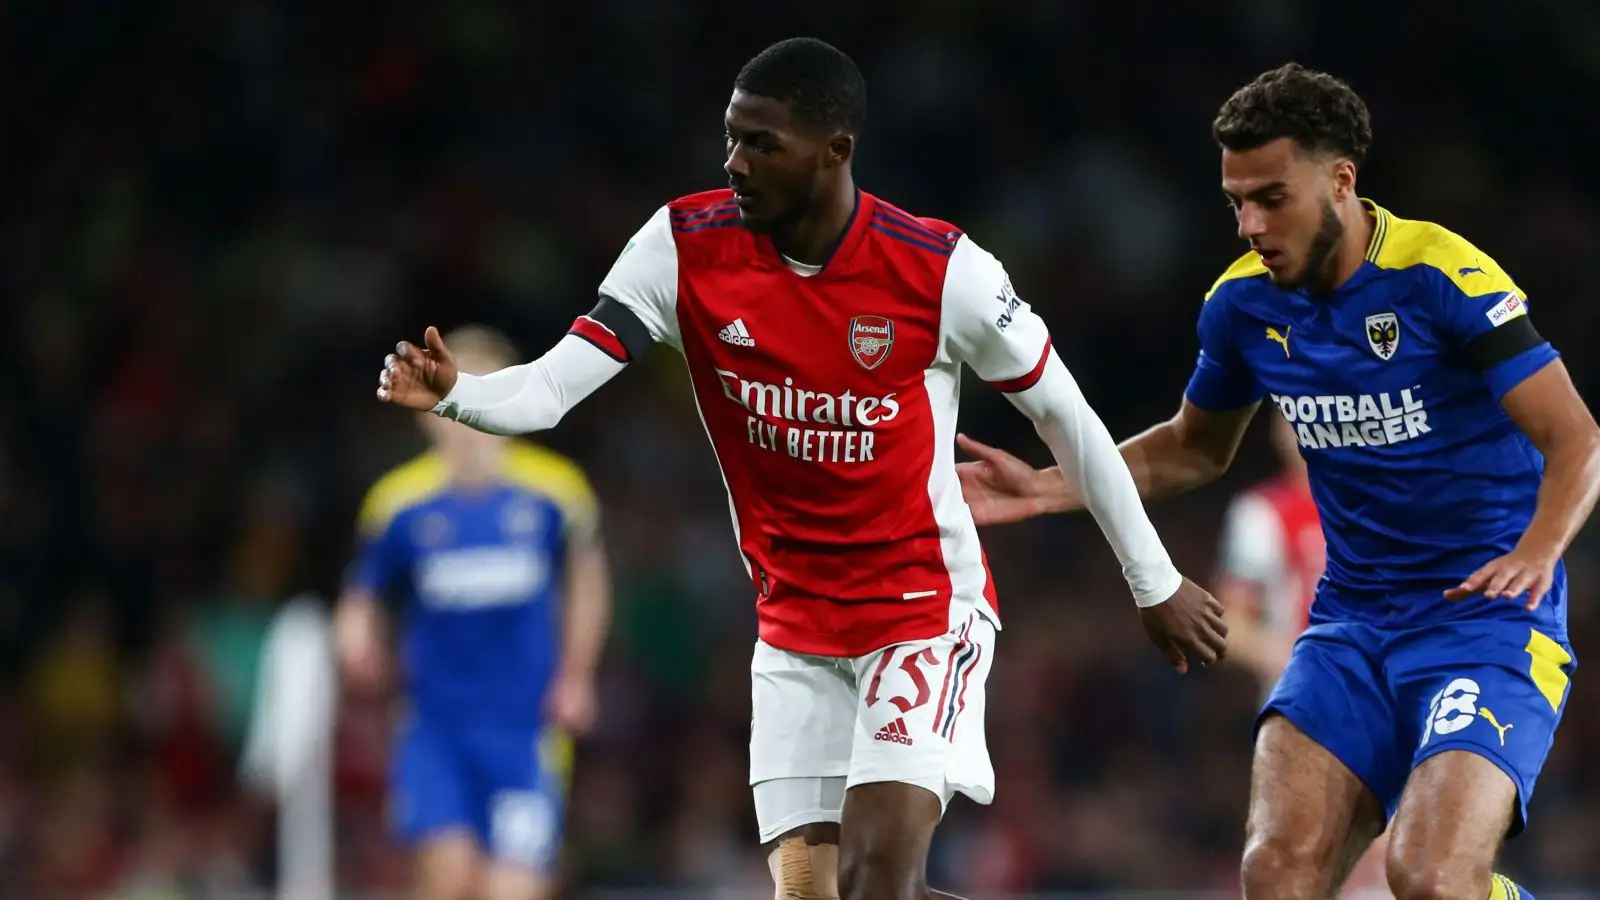 Arsenal outcast told he ‘isn’t ready’ to play and he has ‘a lot of work to do’ at loan club